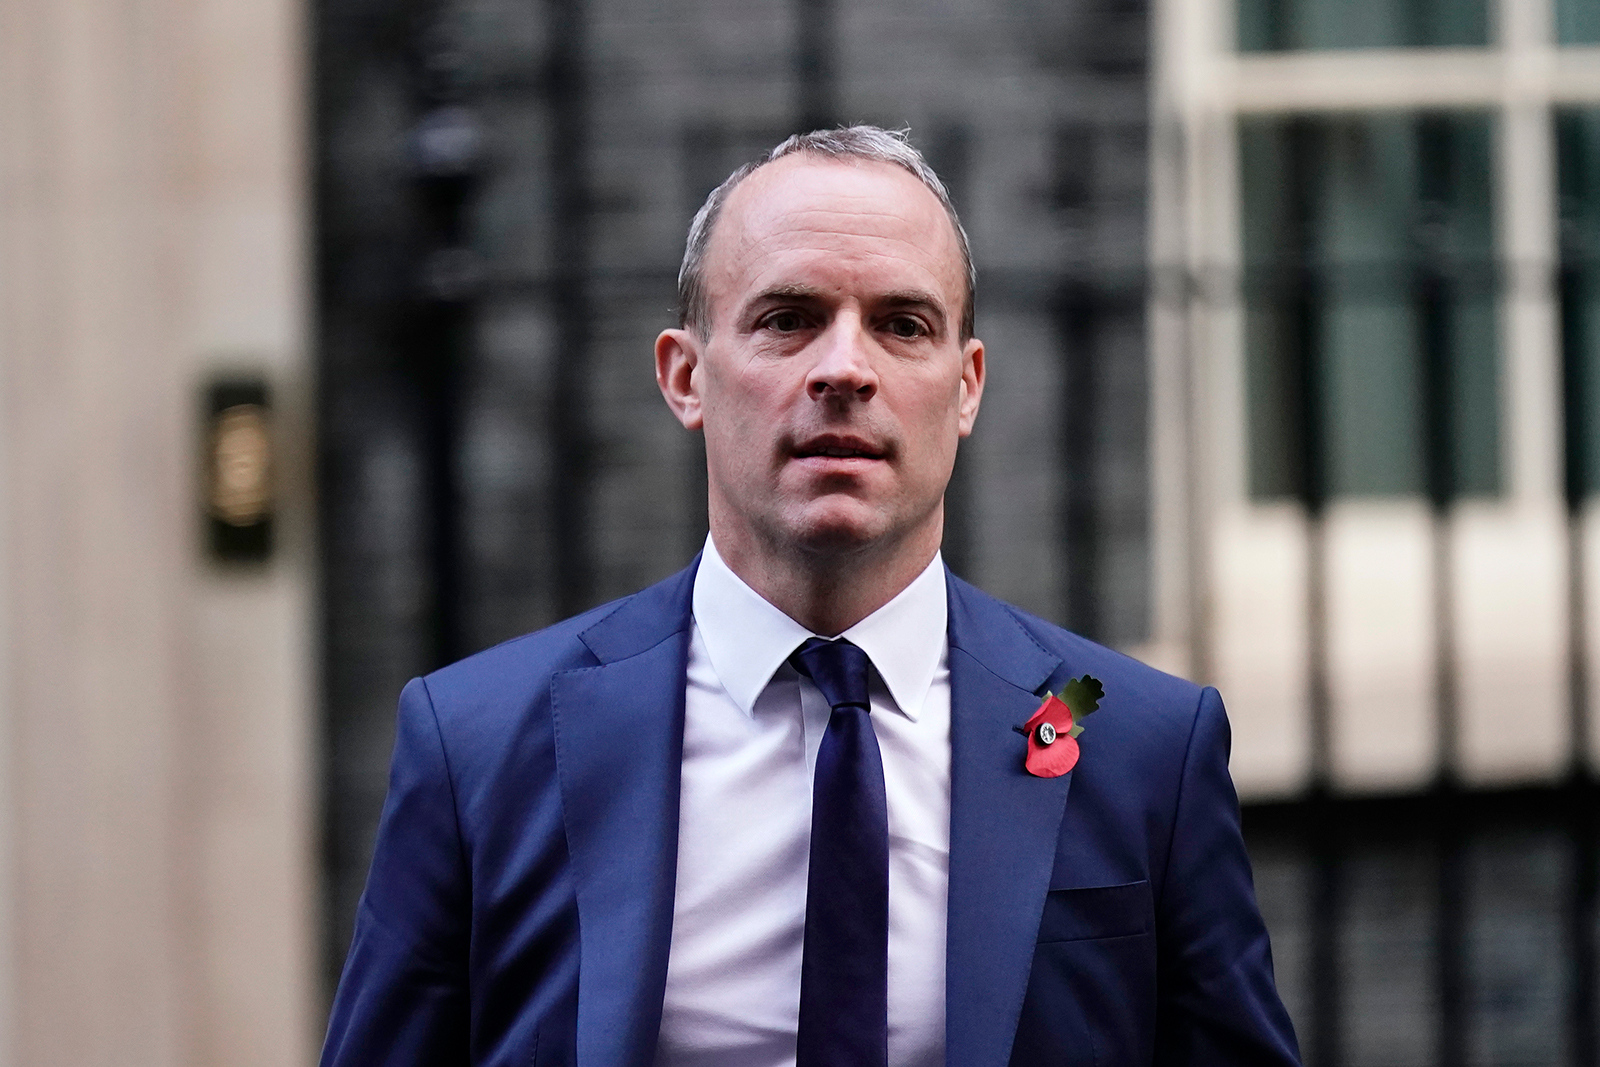 Dominic Raab leaves 10 Downing Street in London on August 11, 2022.